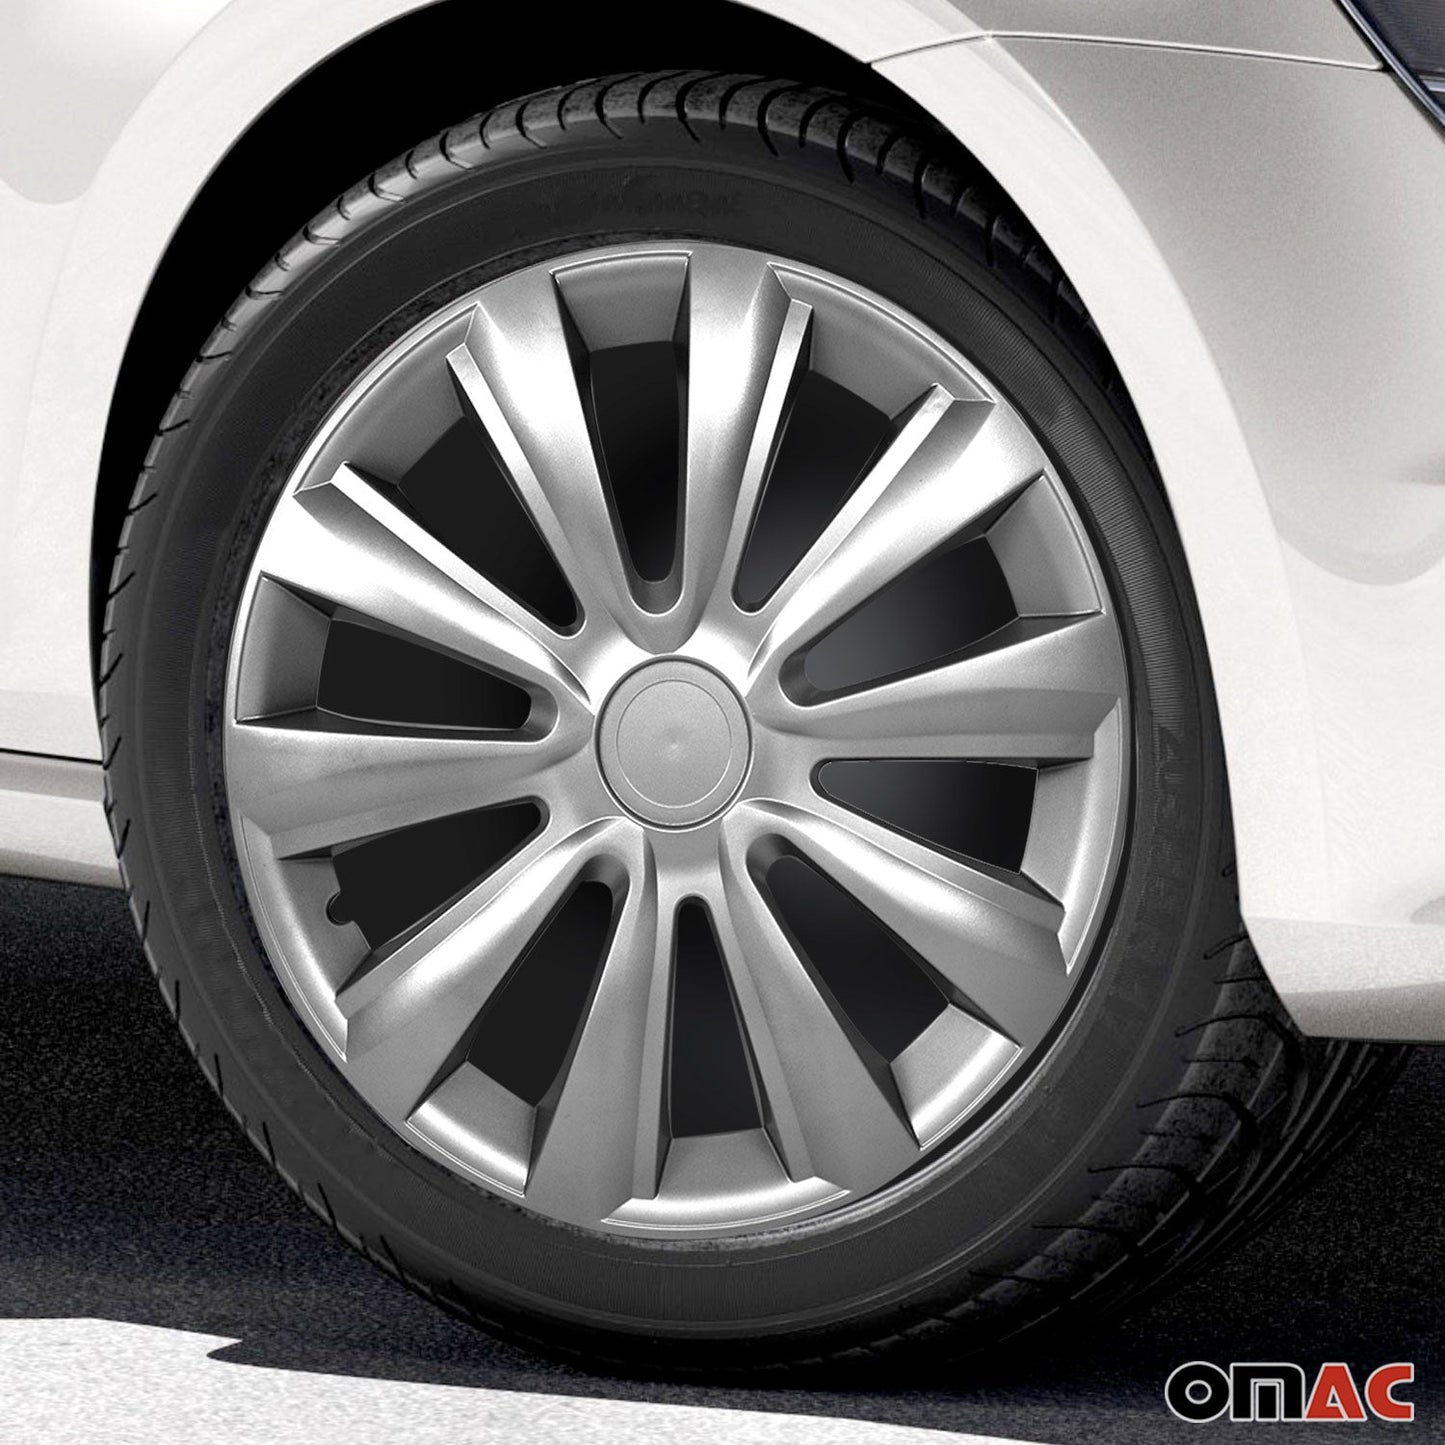 OMAC 16 Inch Wheel Covers Hubcaps for RAM Silver Gray Gloss G002352